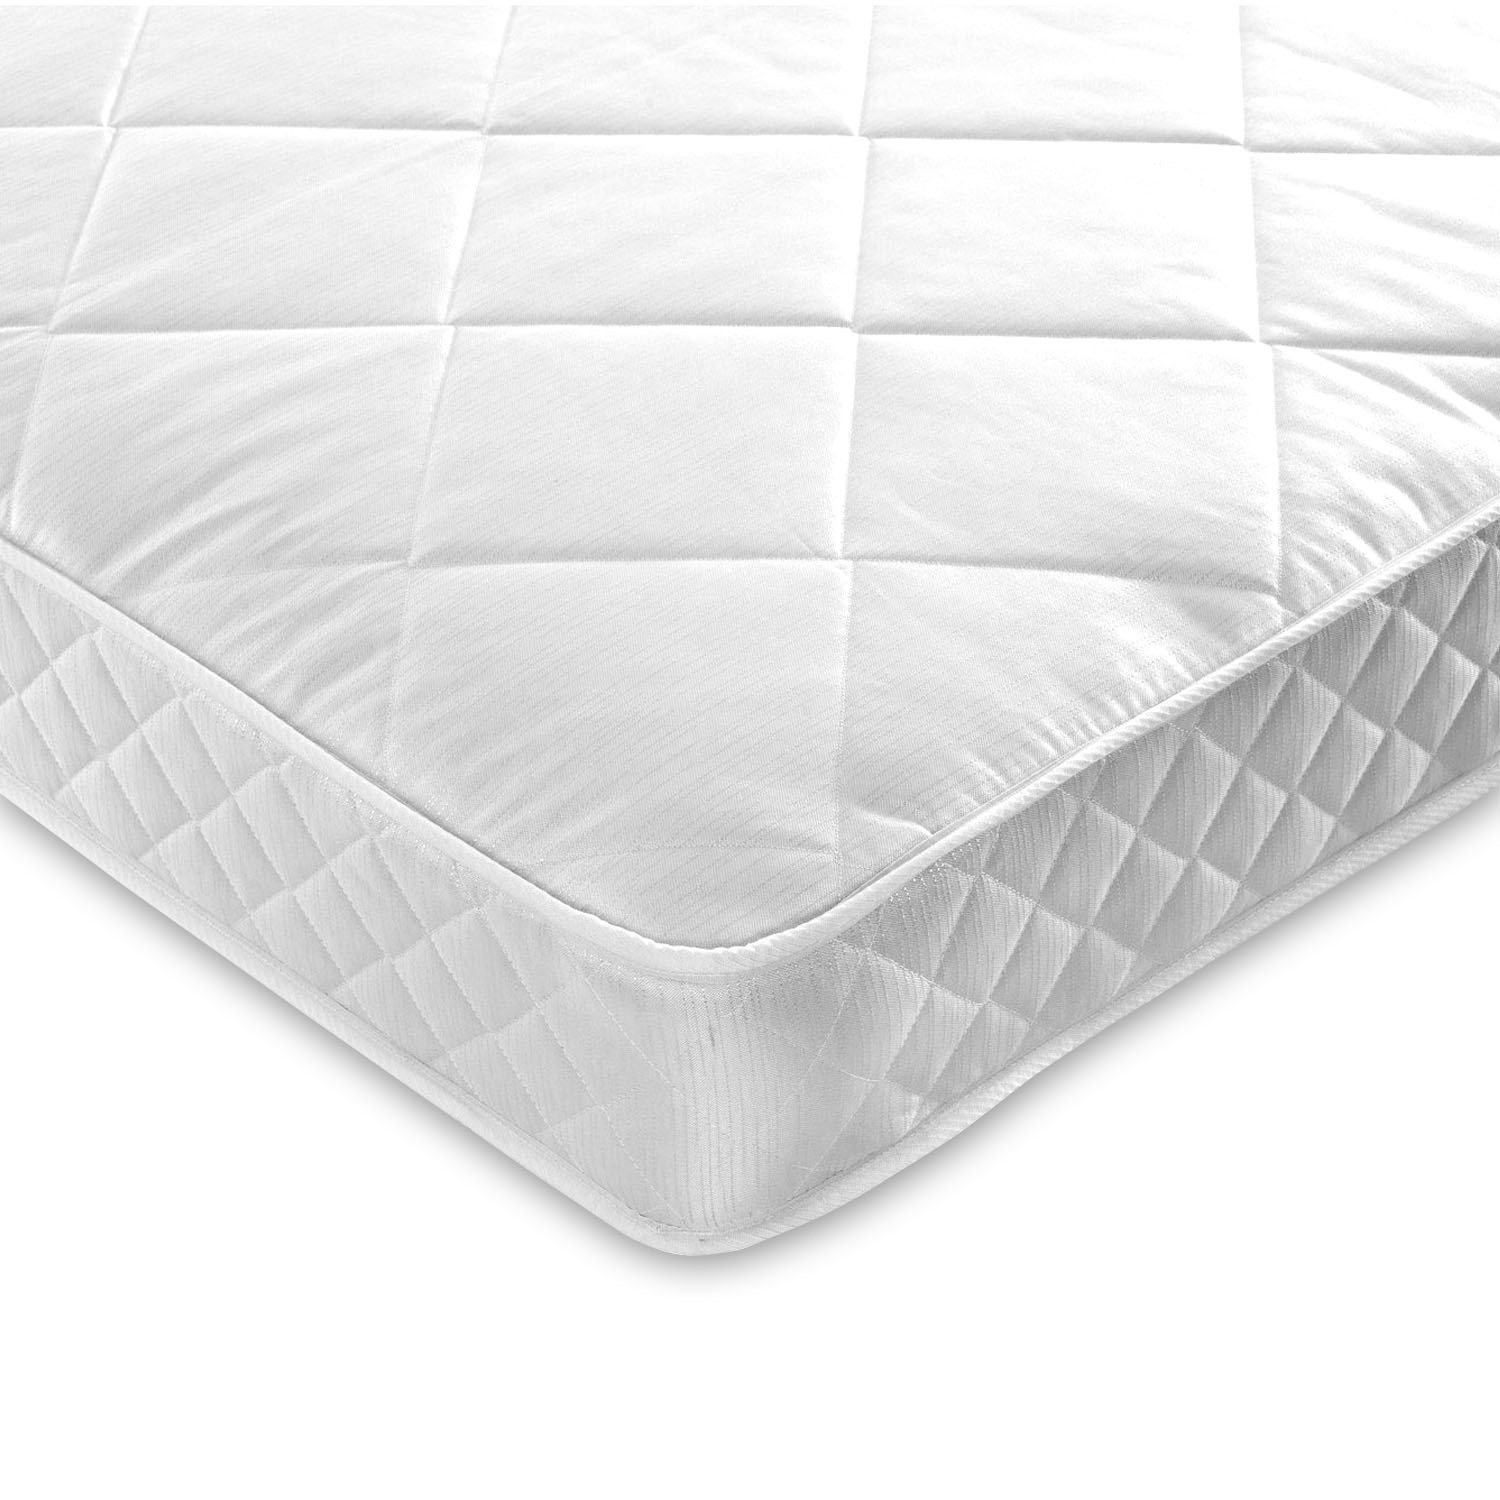 Luxury Quilted Small Double 4ft Coil Sprung Mattress - Medium/Firm